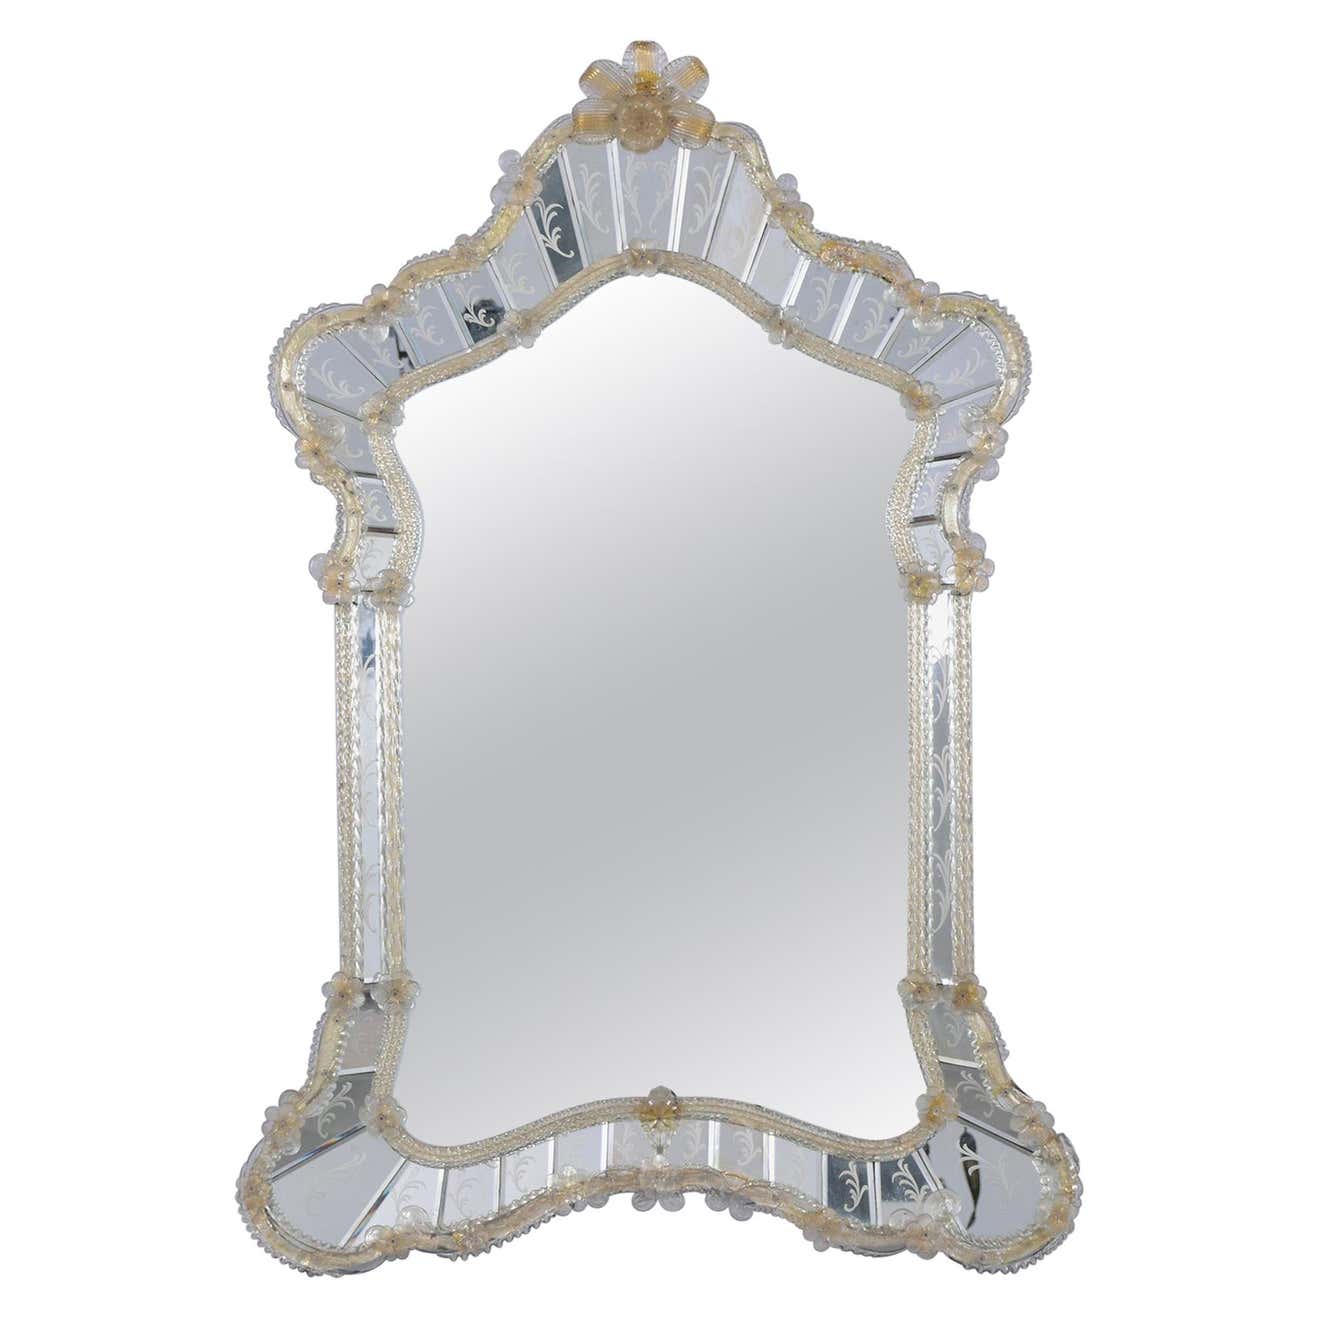 Vintage Italian Hand-Crafted Mirror with Etched Leaf Design & Murano Glass Flower Molding